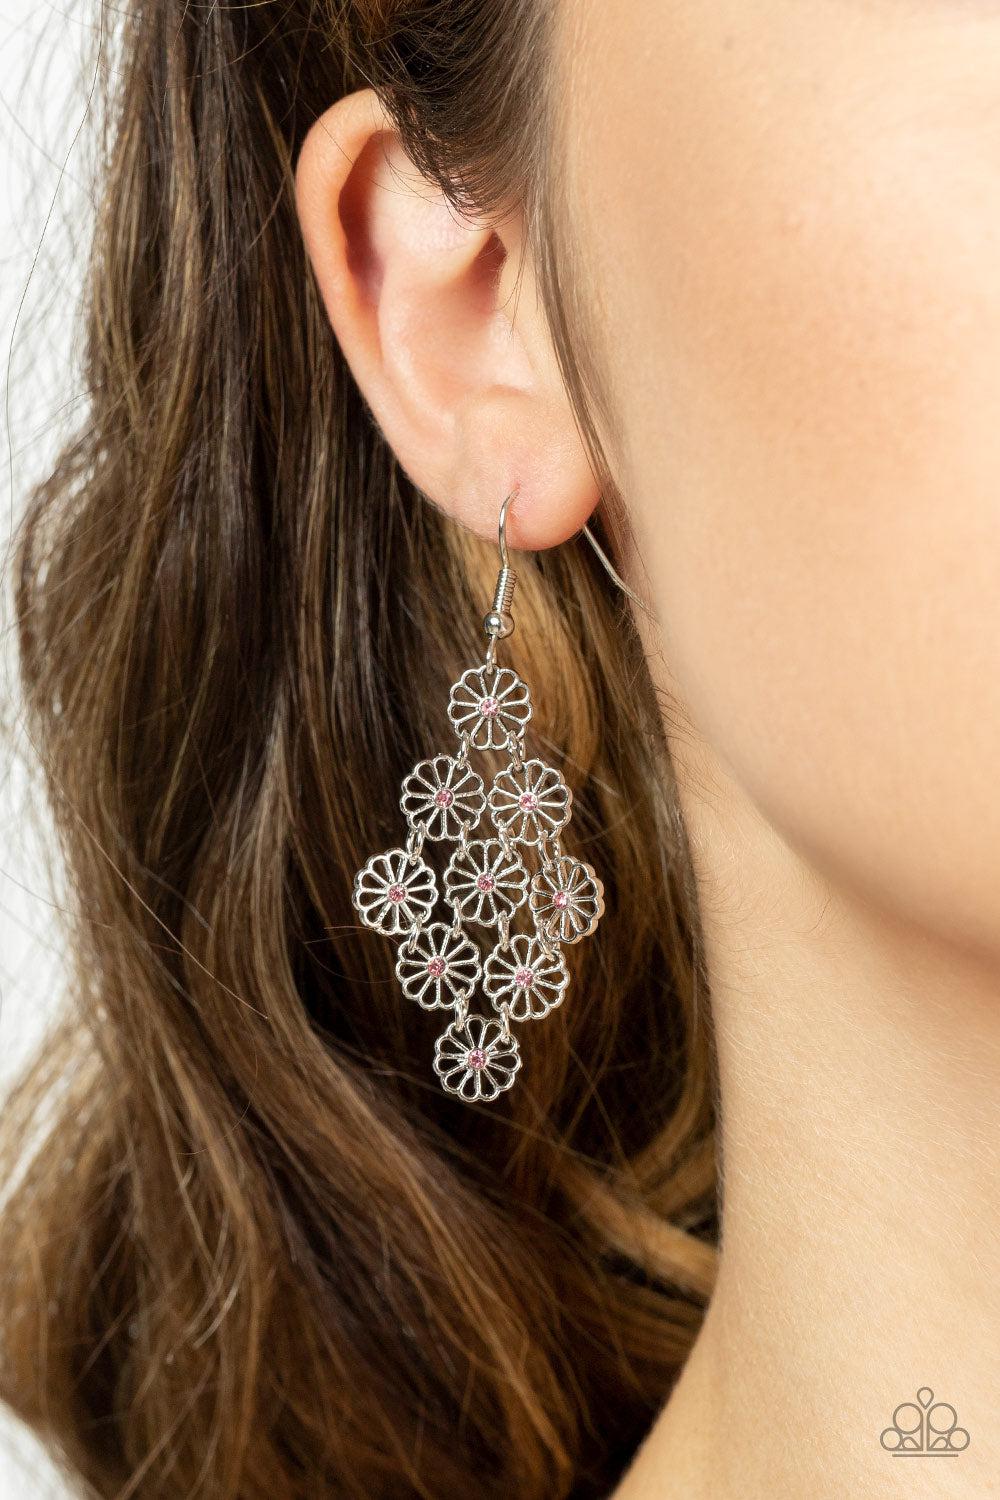 Bustling Blooms Pink Flower Earrings - Paparazzi Accessories-on model - CarasShop.com - $5 Jewelry by Cara Jewels